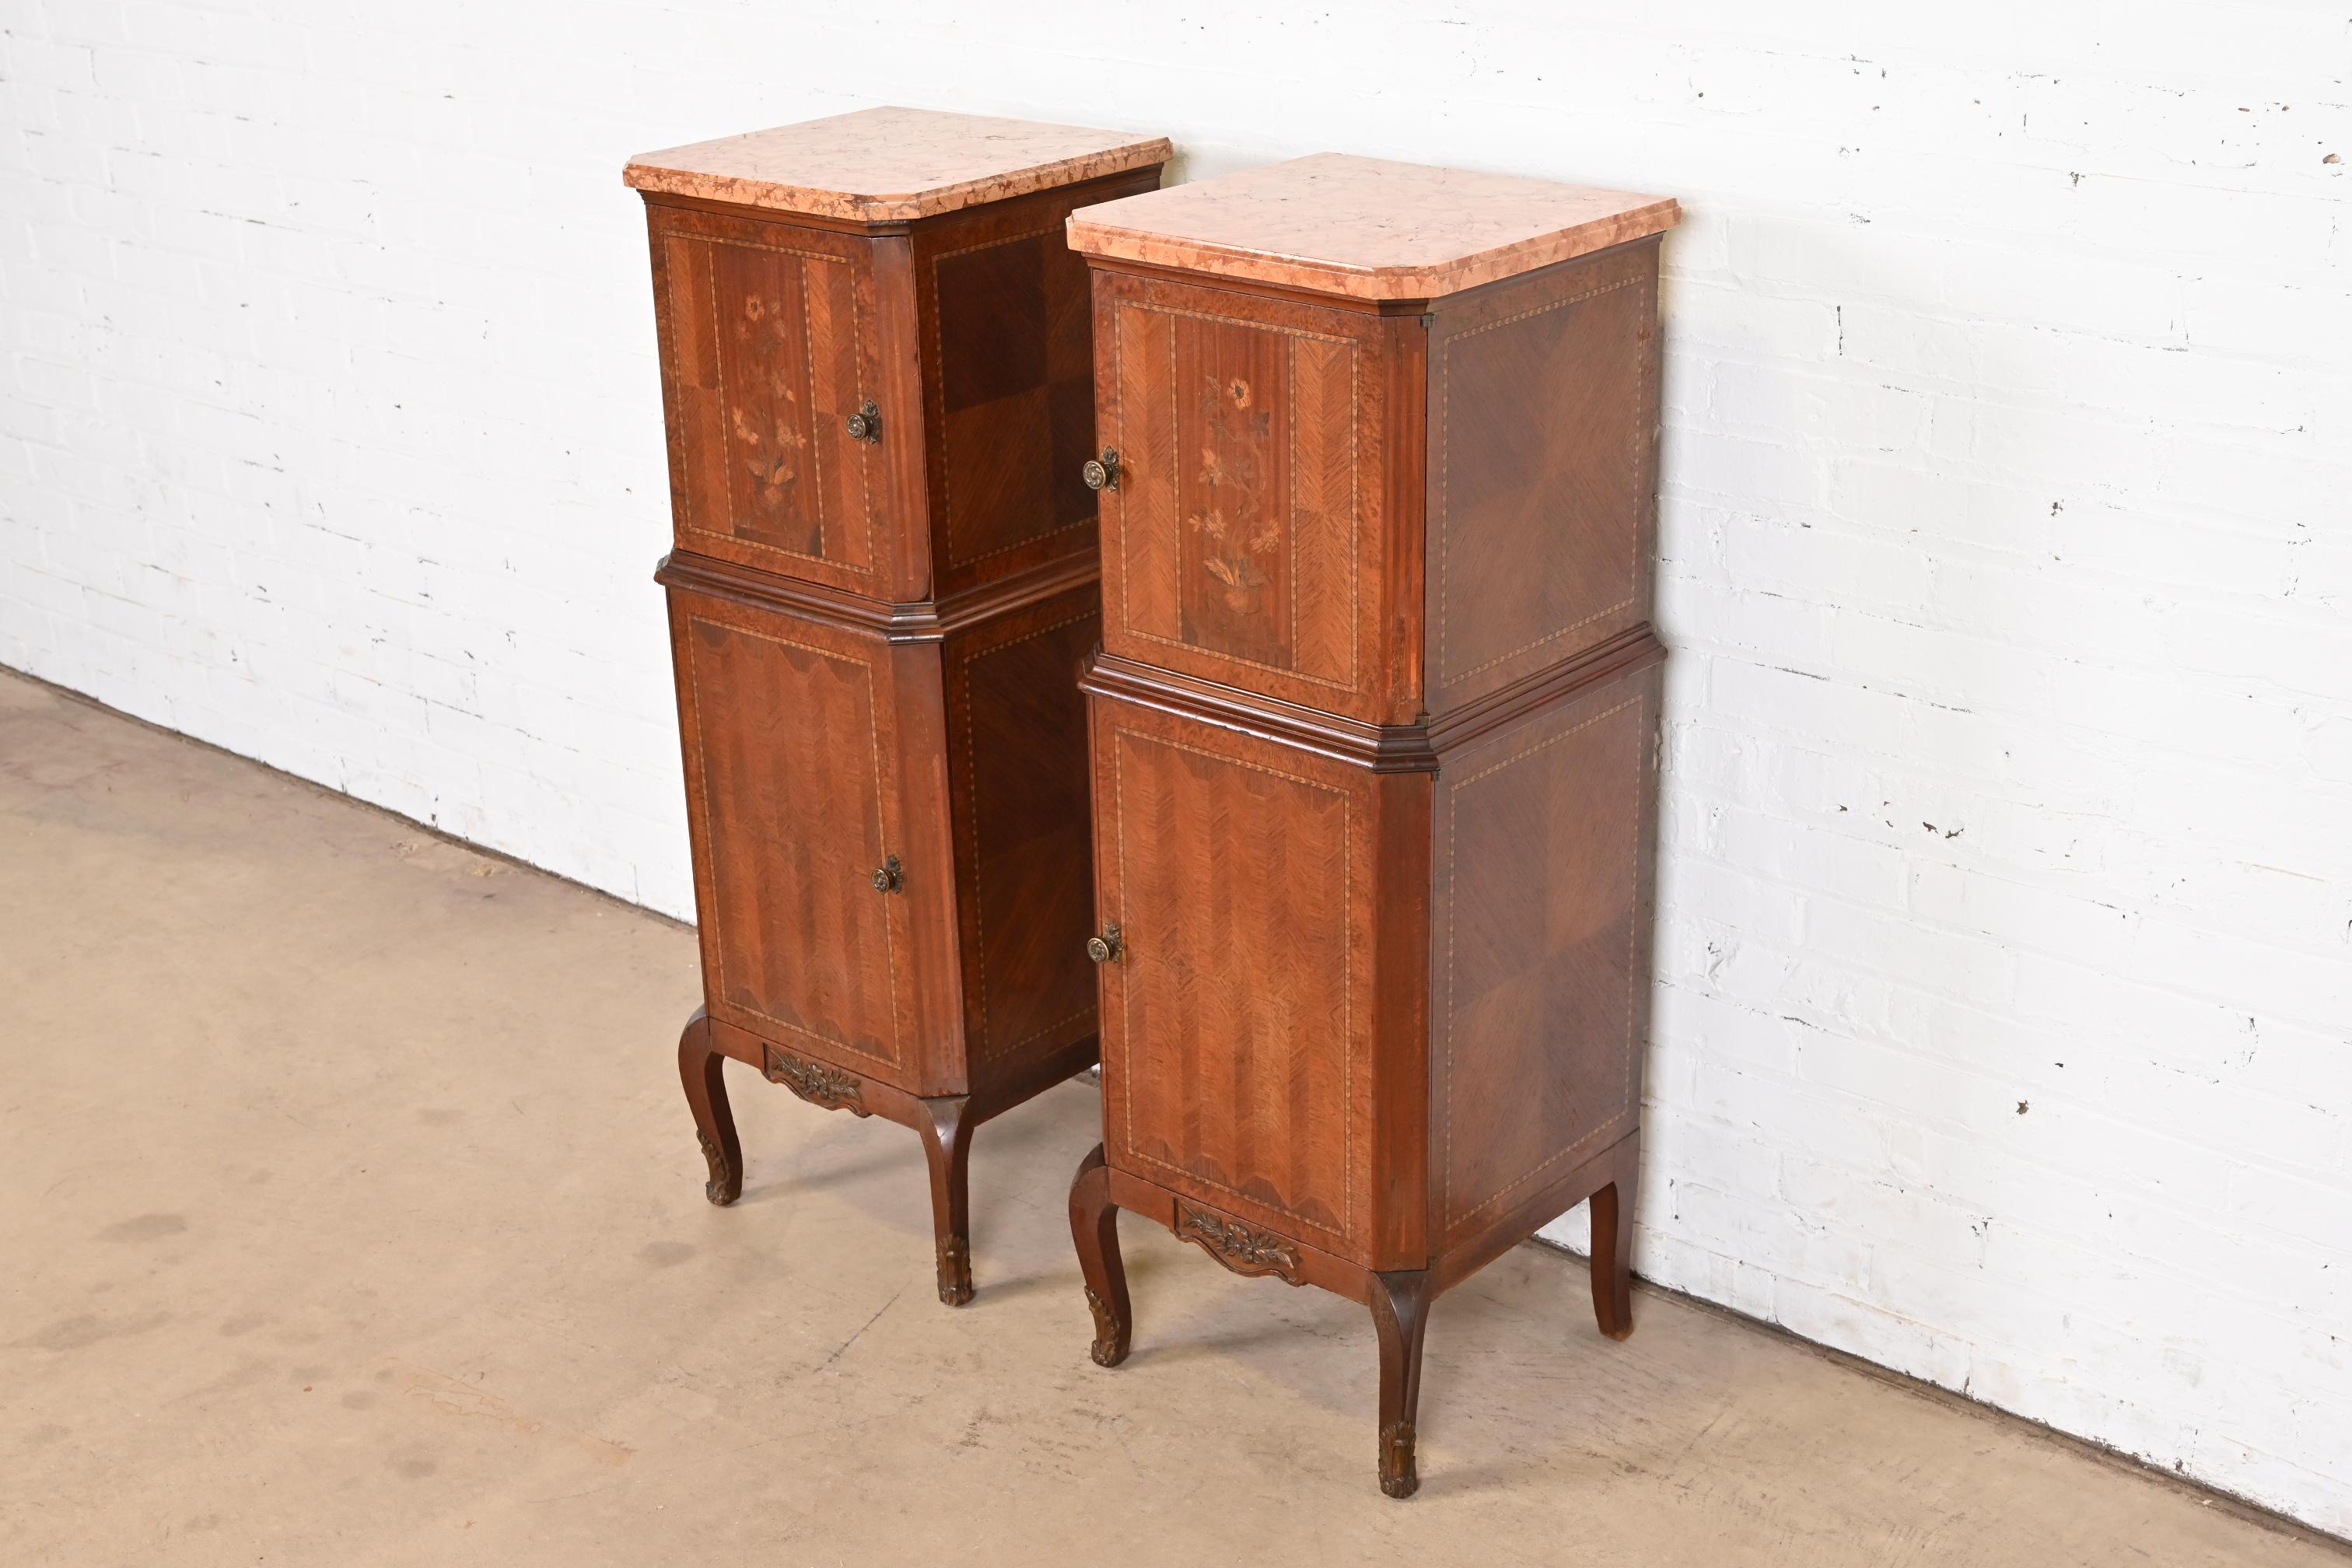 20th Century French Louis XV Kingwood Inlaid Marquetry Marble Top Lingerie Chests, Pair For Sale